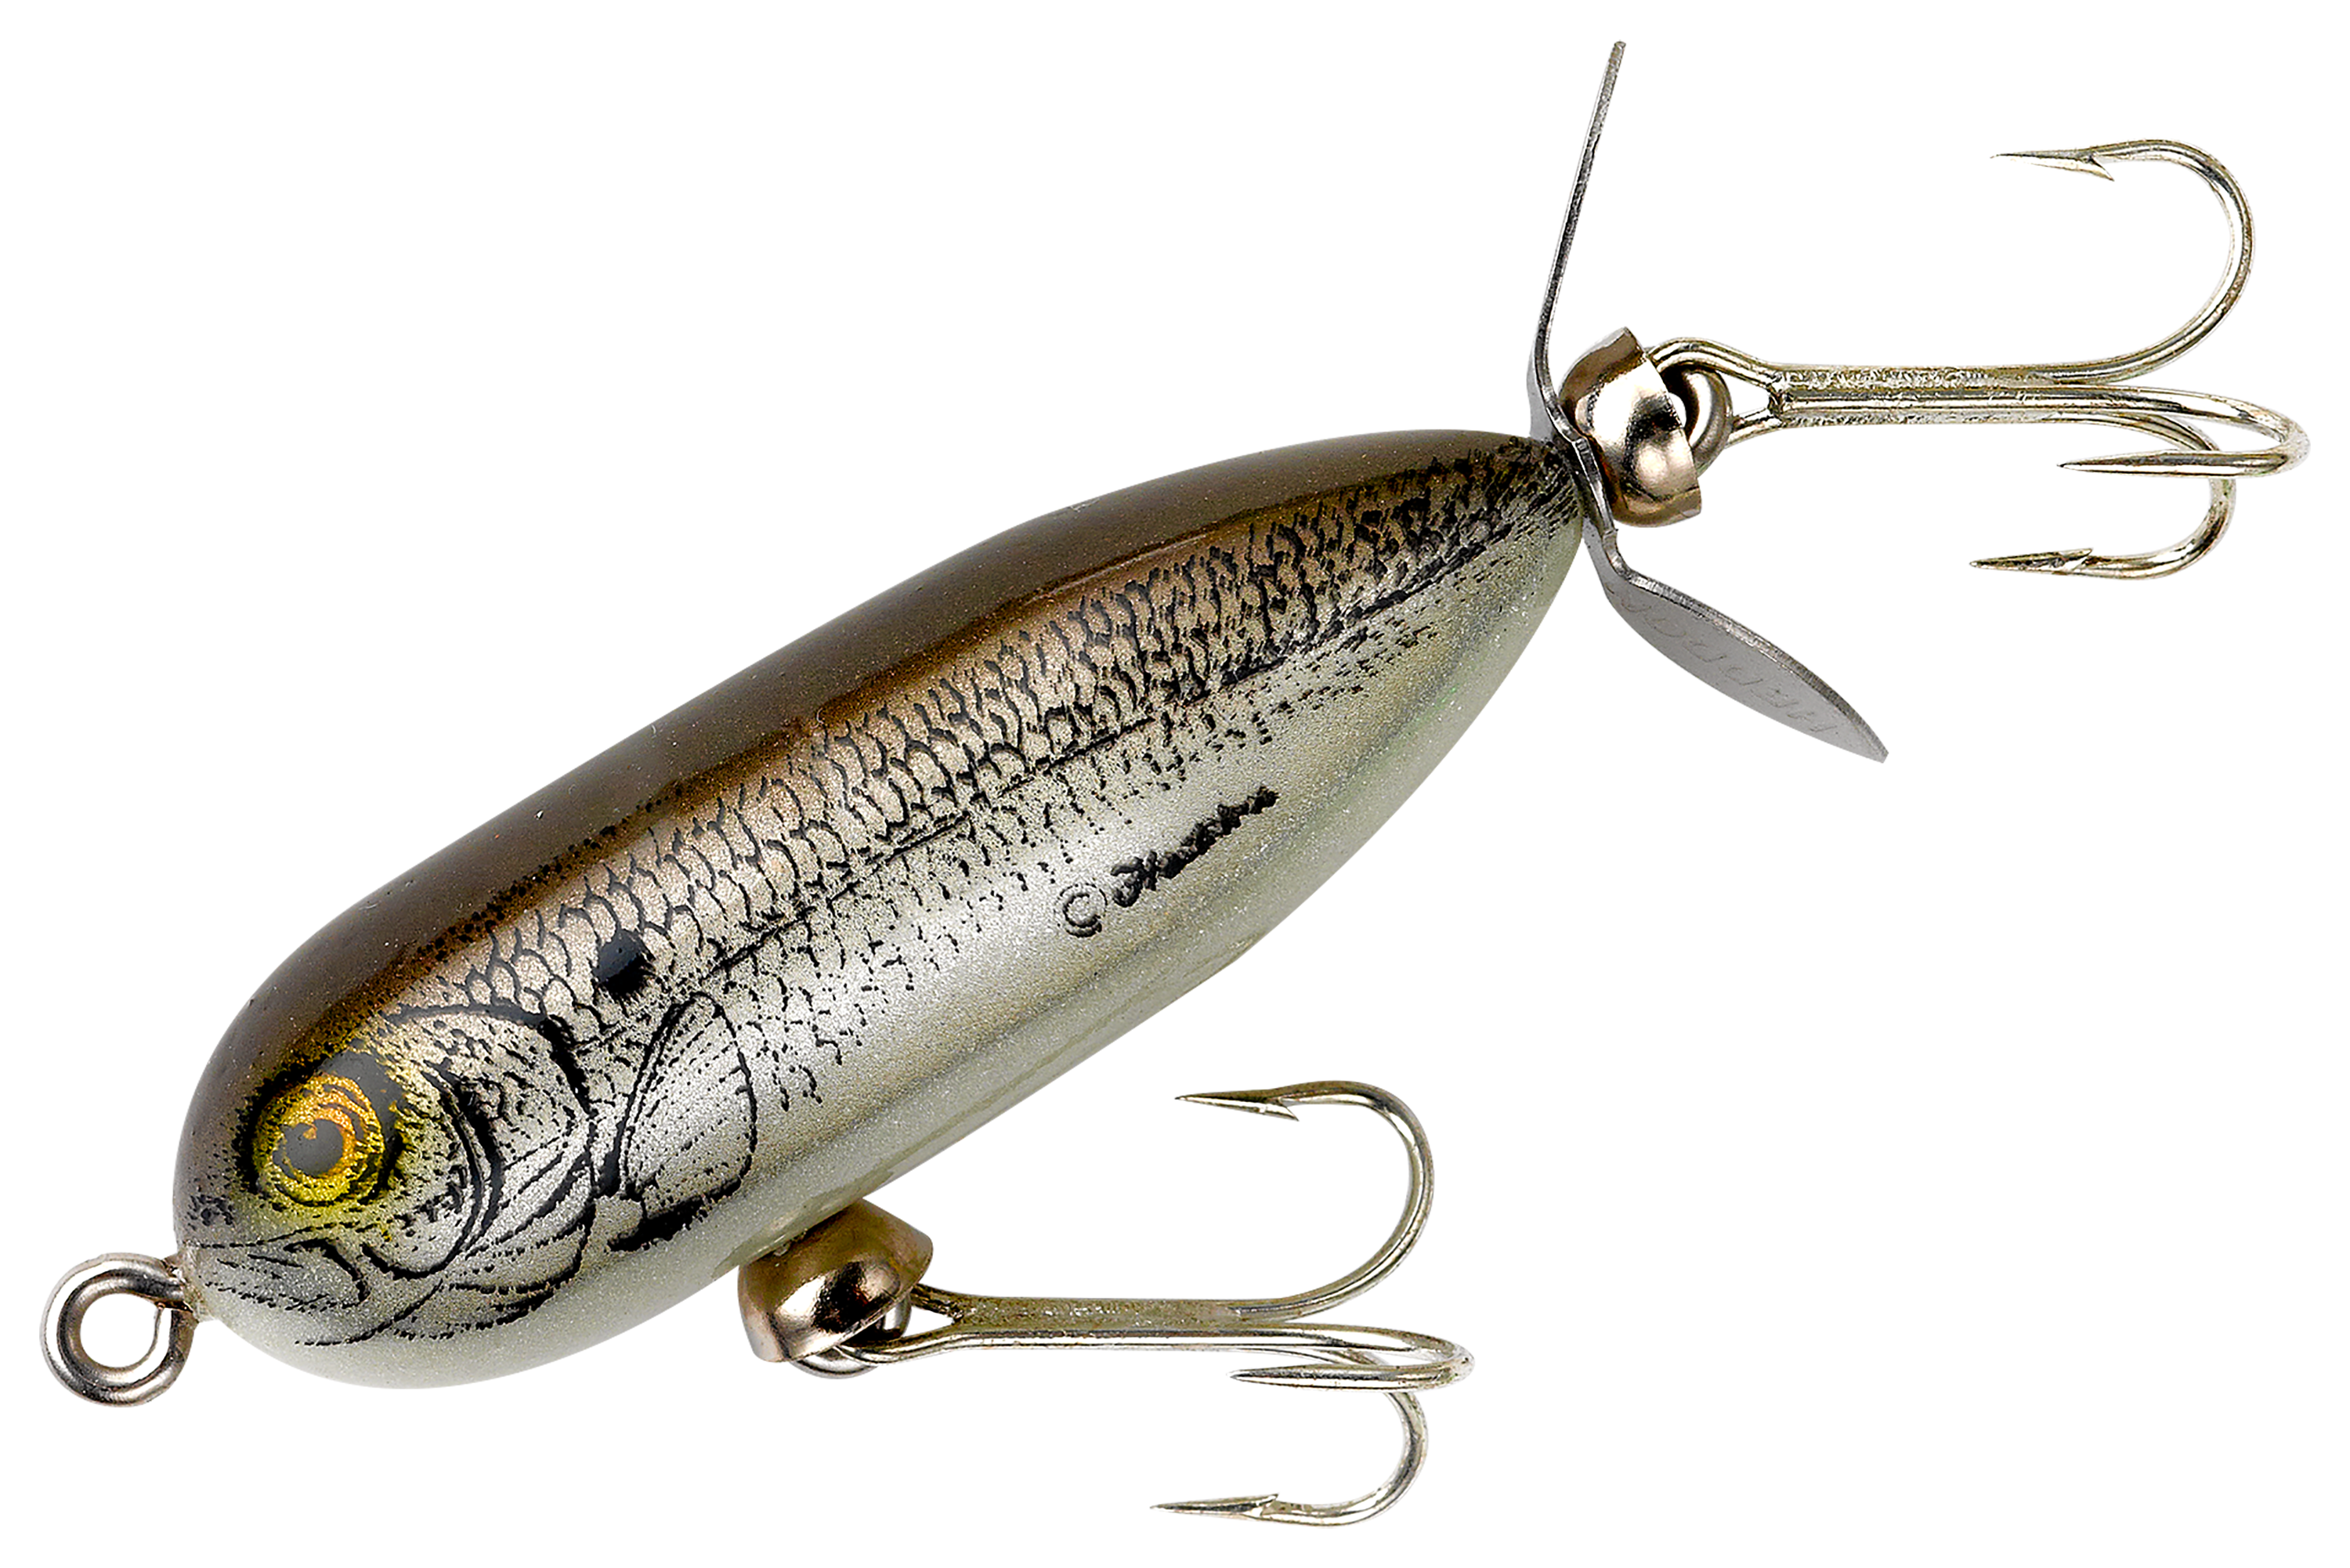 Heddon Lures X0361BRS Baby Torpedo Fishing Lures, Brown Crawdad, 2.5,  Topwater Lures -  Canada